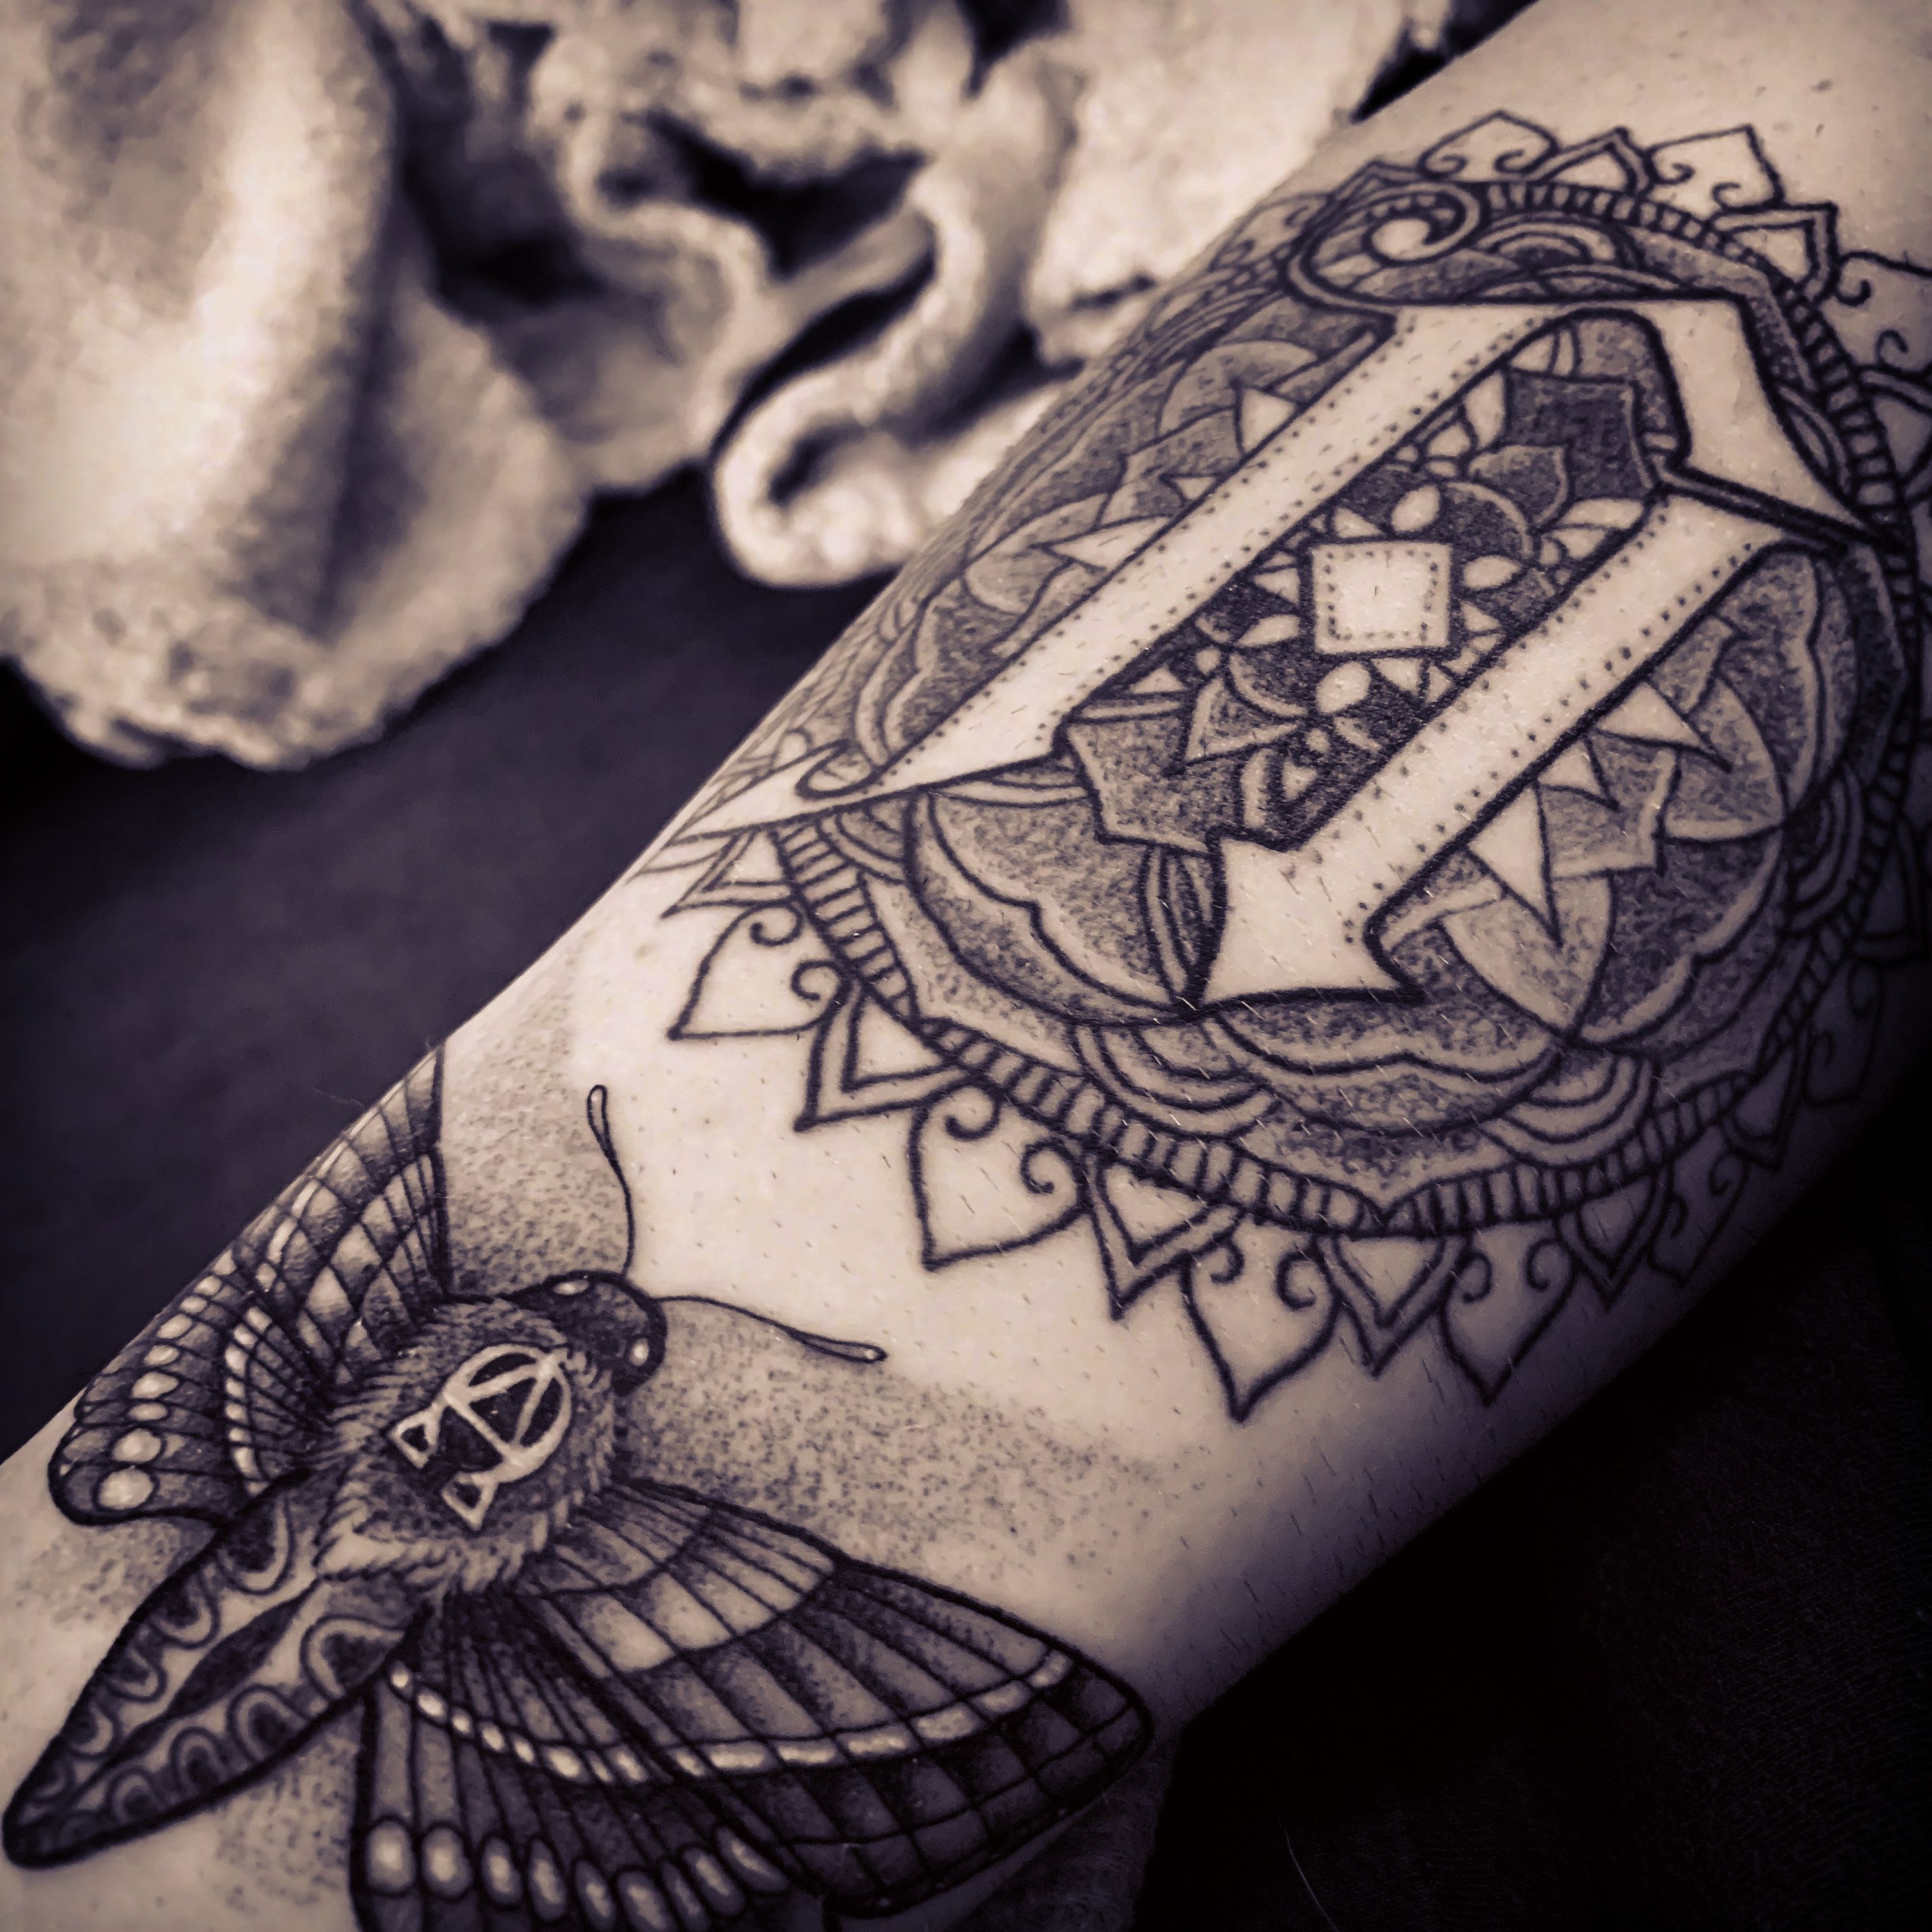 my first tattoo : hommage to Architects Band by killswitchlogic on  DeviantArt